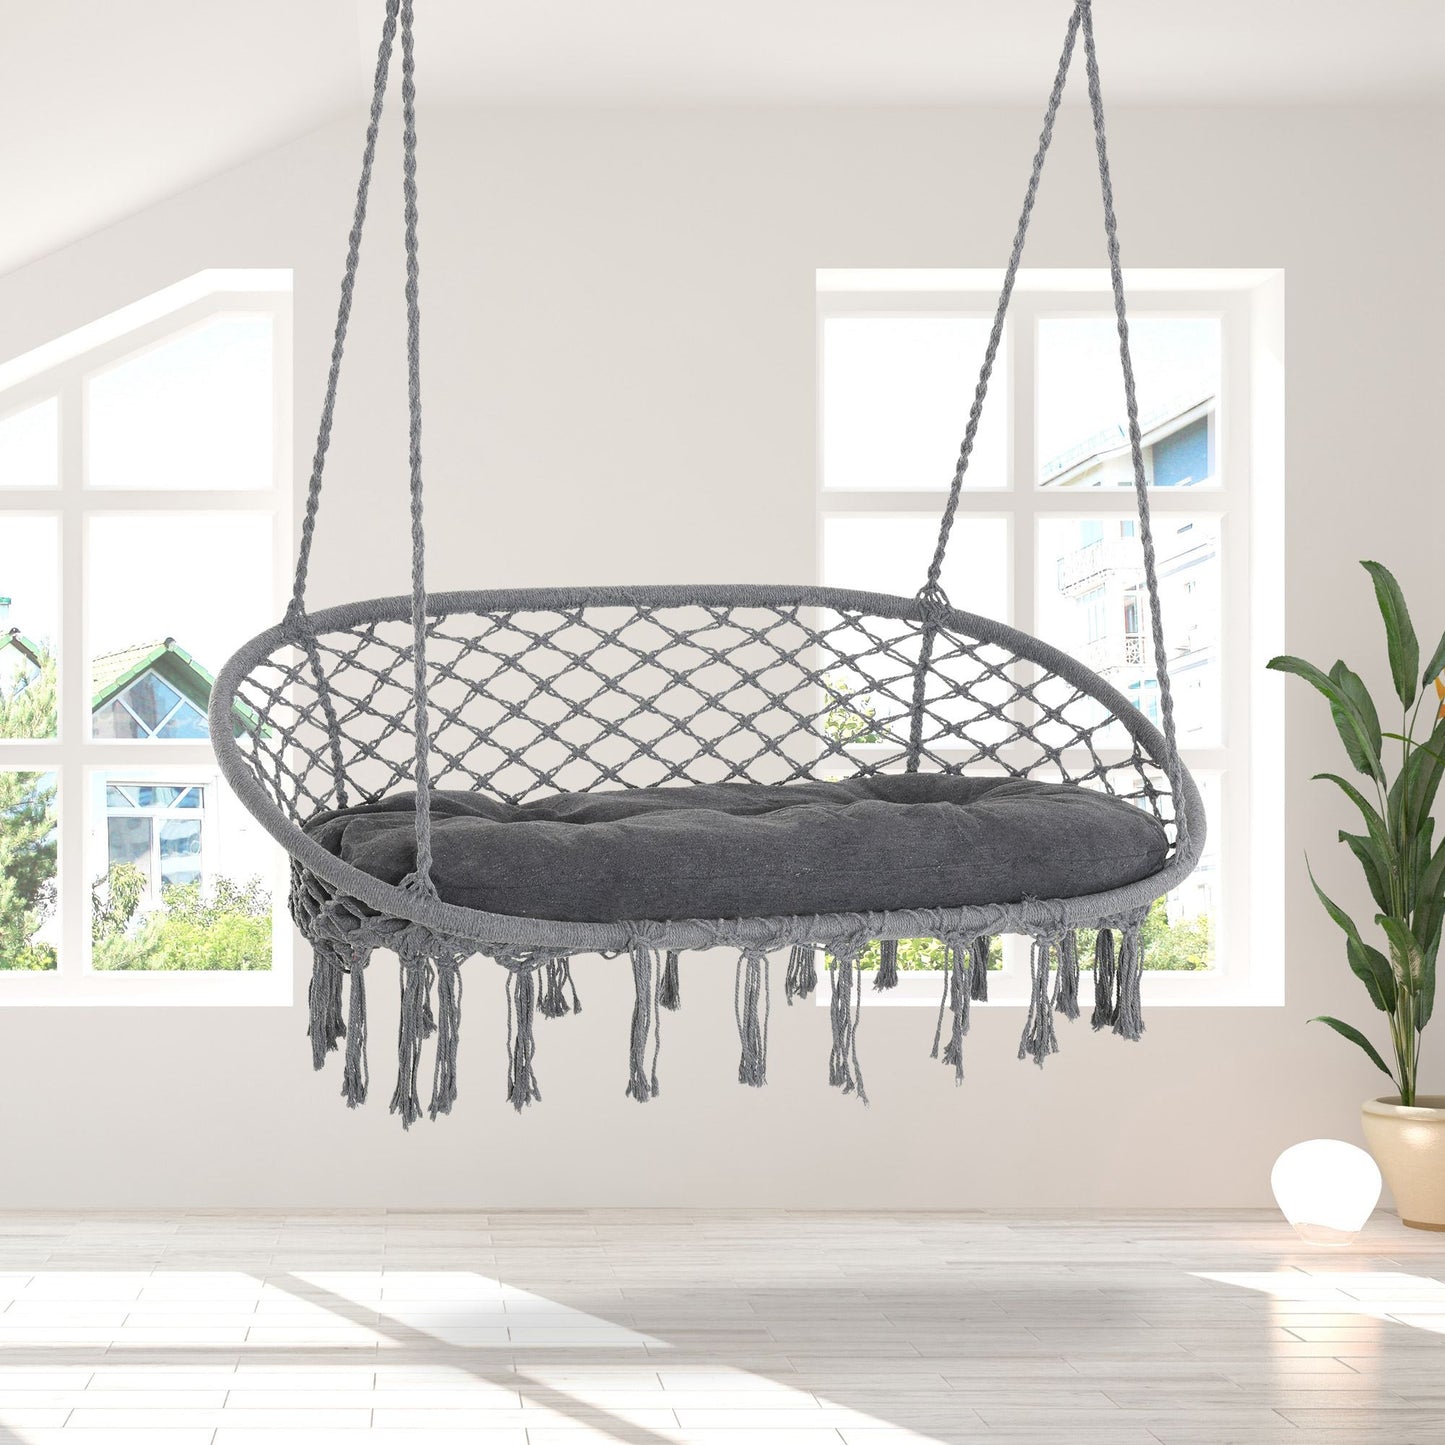 Outsunny Hanging Hammock Chair Cotton Rope Porch Swing Dark Grey